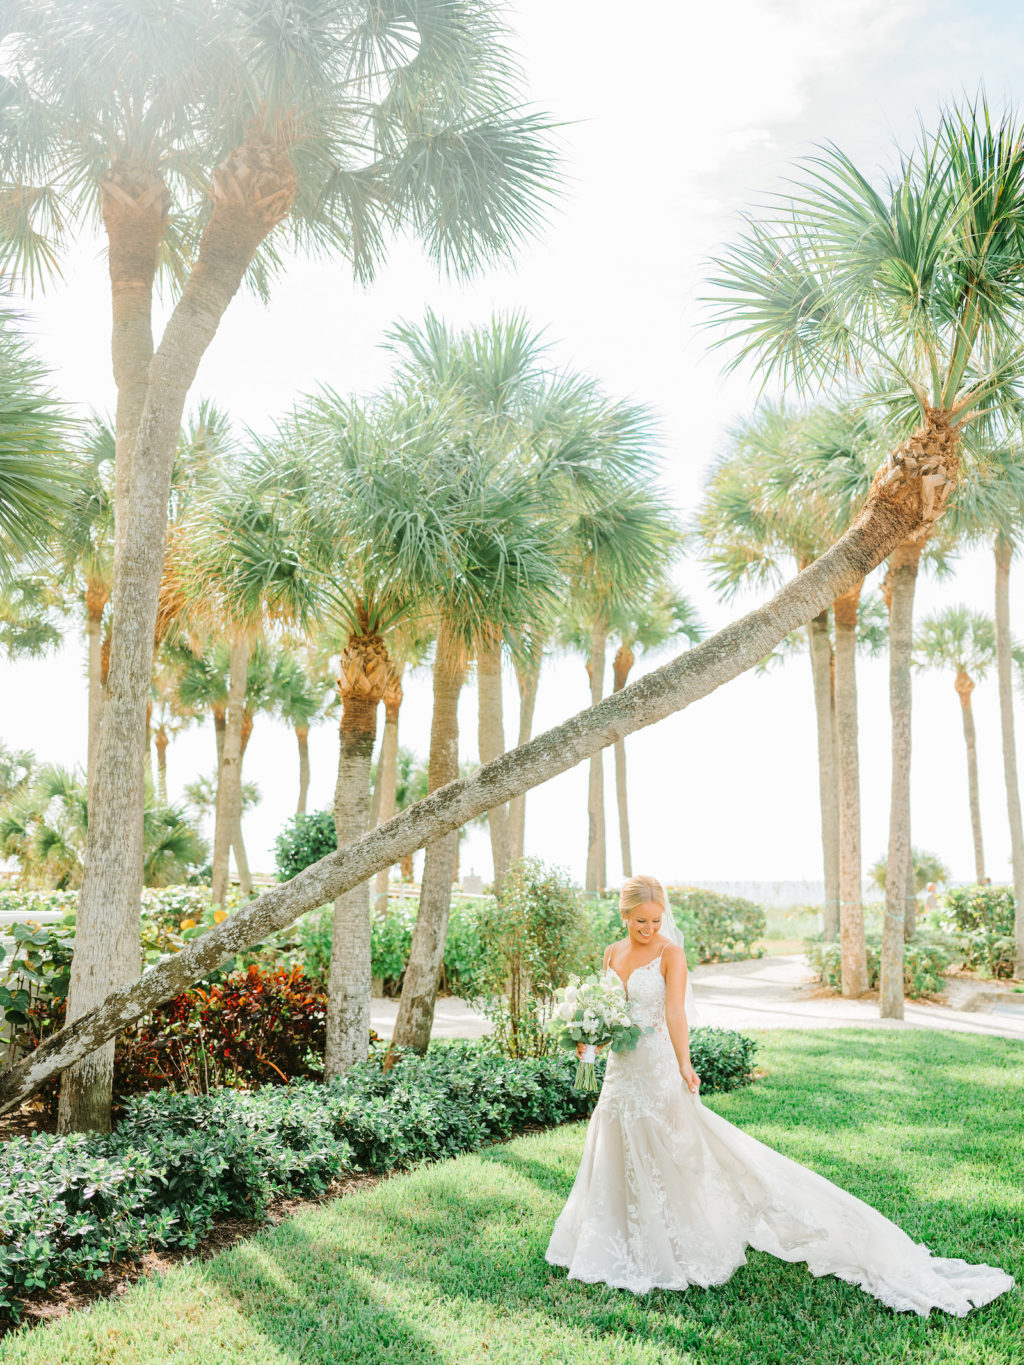 Romantic Bride Wearing Spaghetti Strap Lace Wedding Dress Outdoor Under Palm Trees